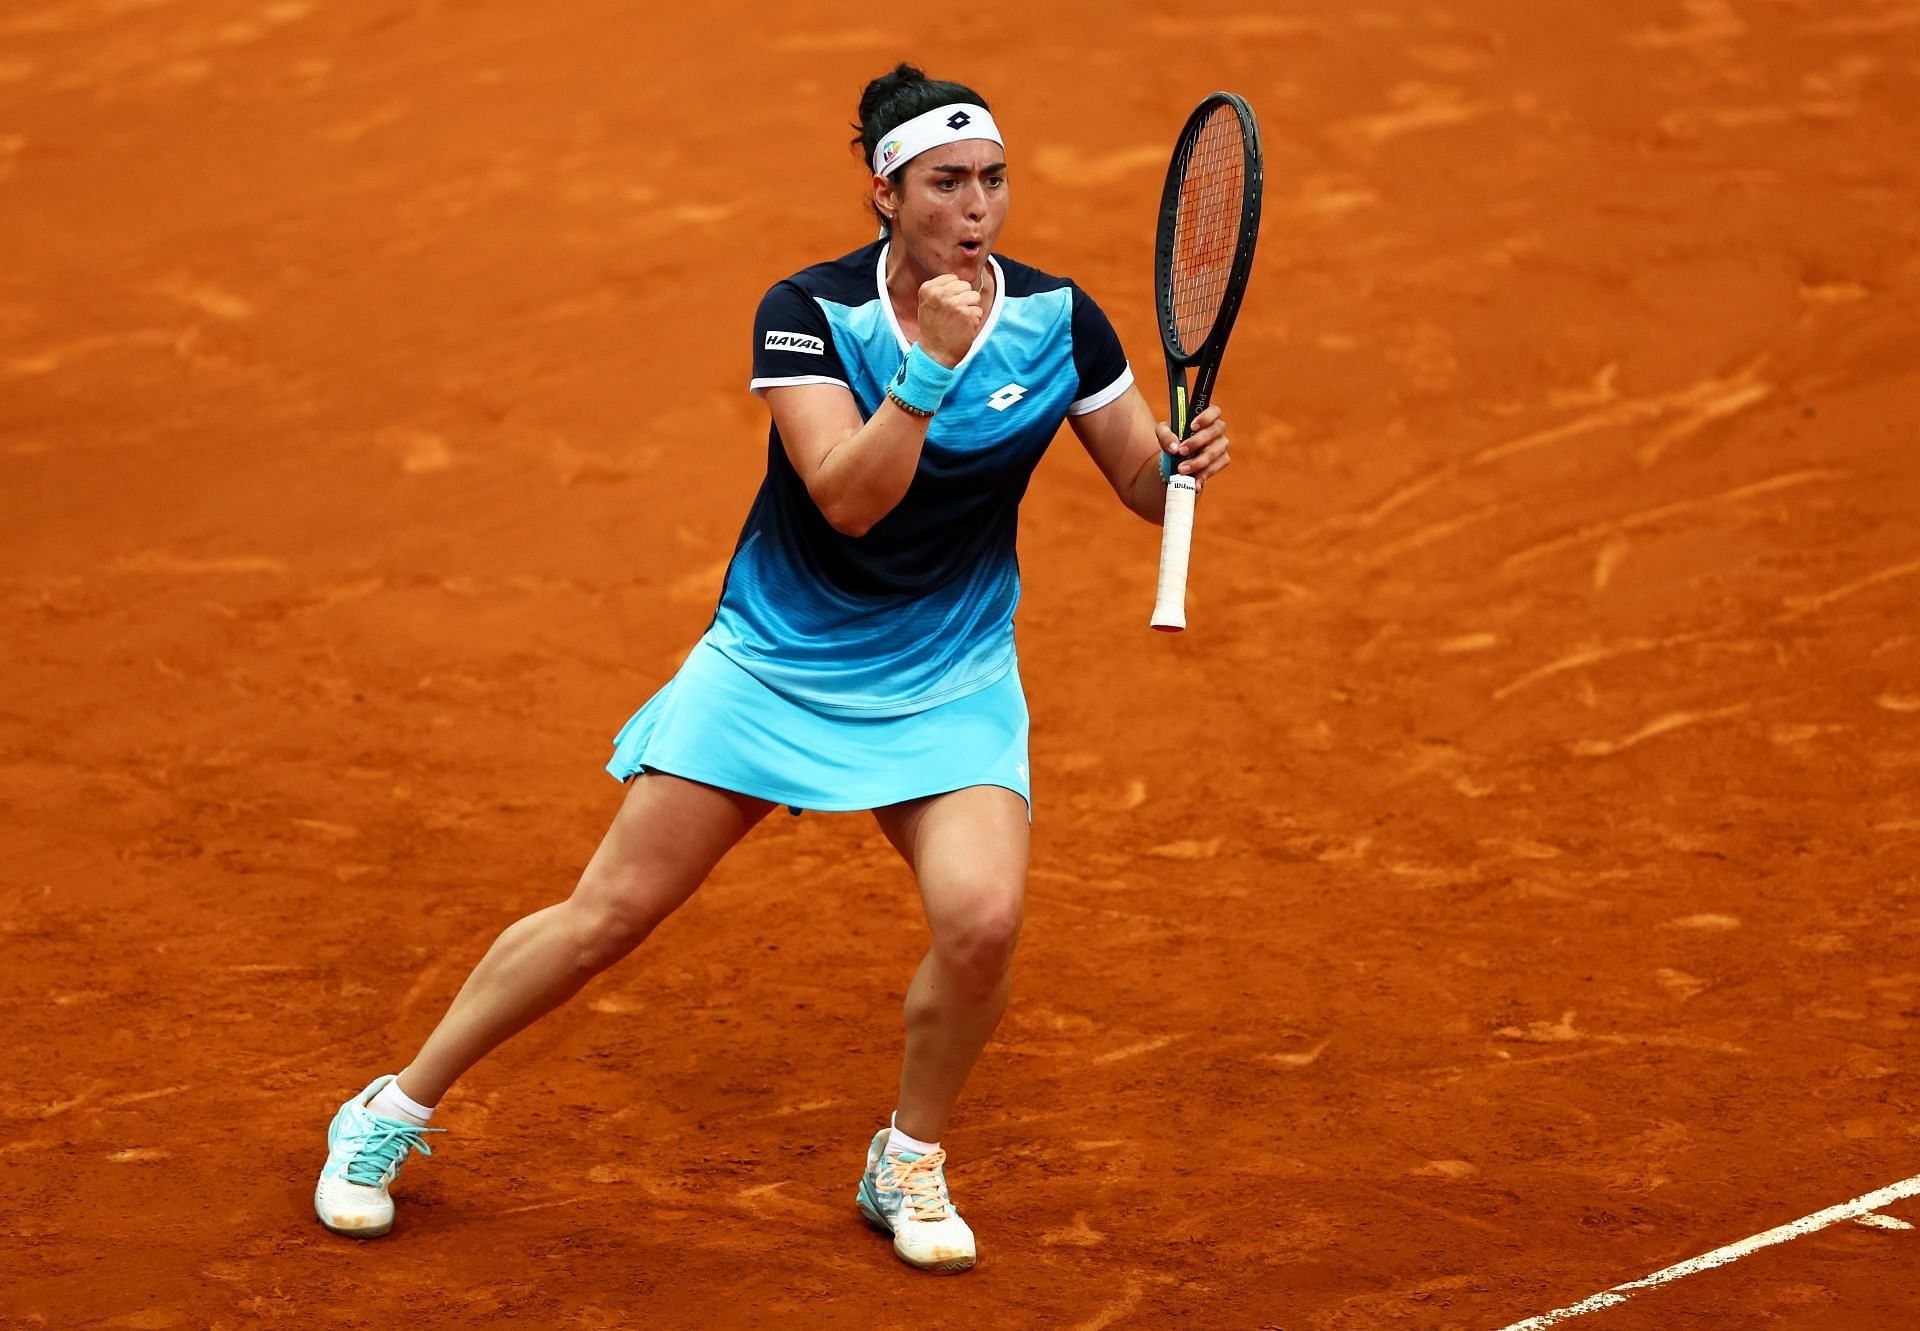 Ons Jabeur takes on Ekaterina Alexandrova in the semifinals of the 2022 Madrid Open